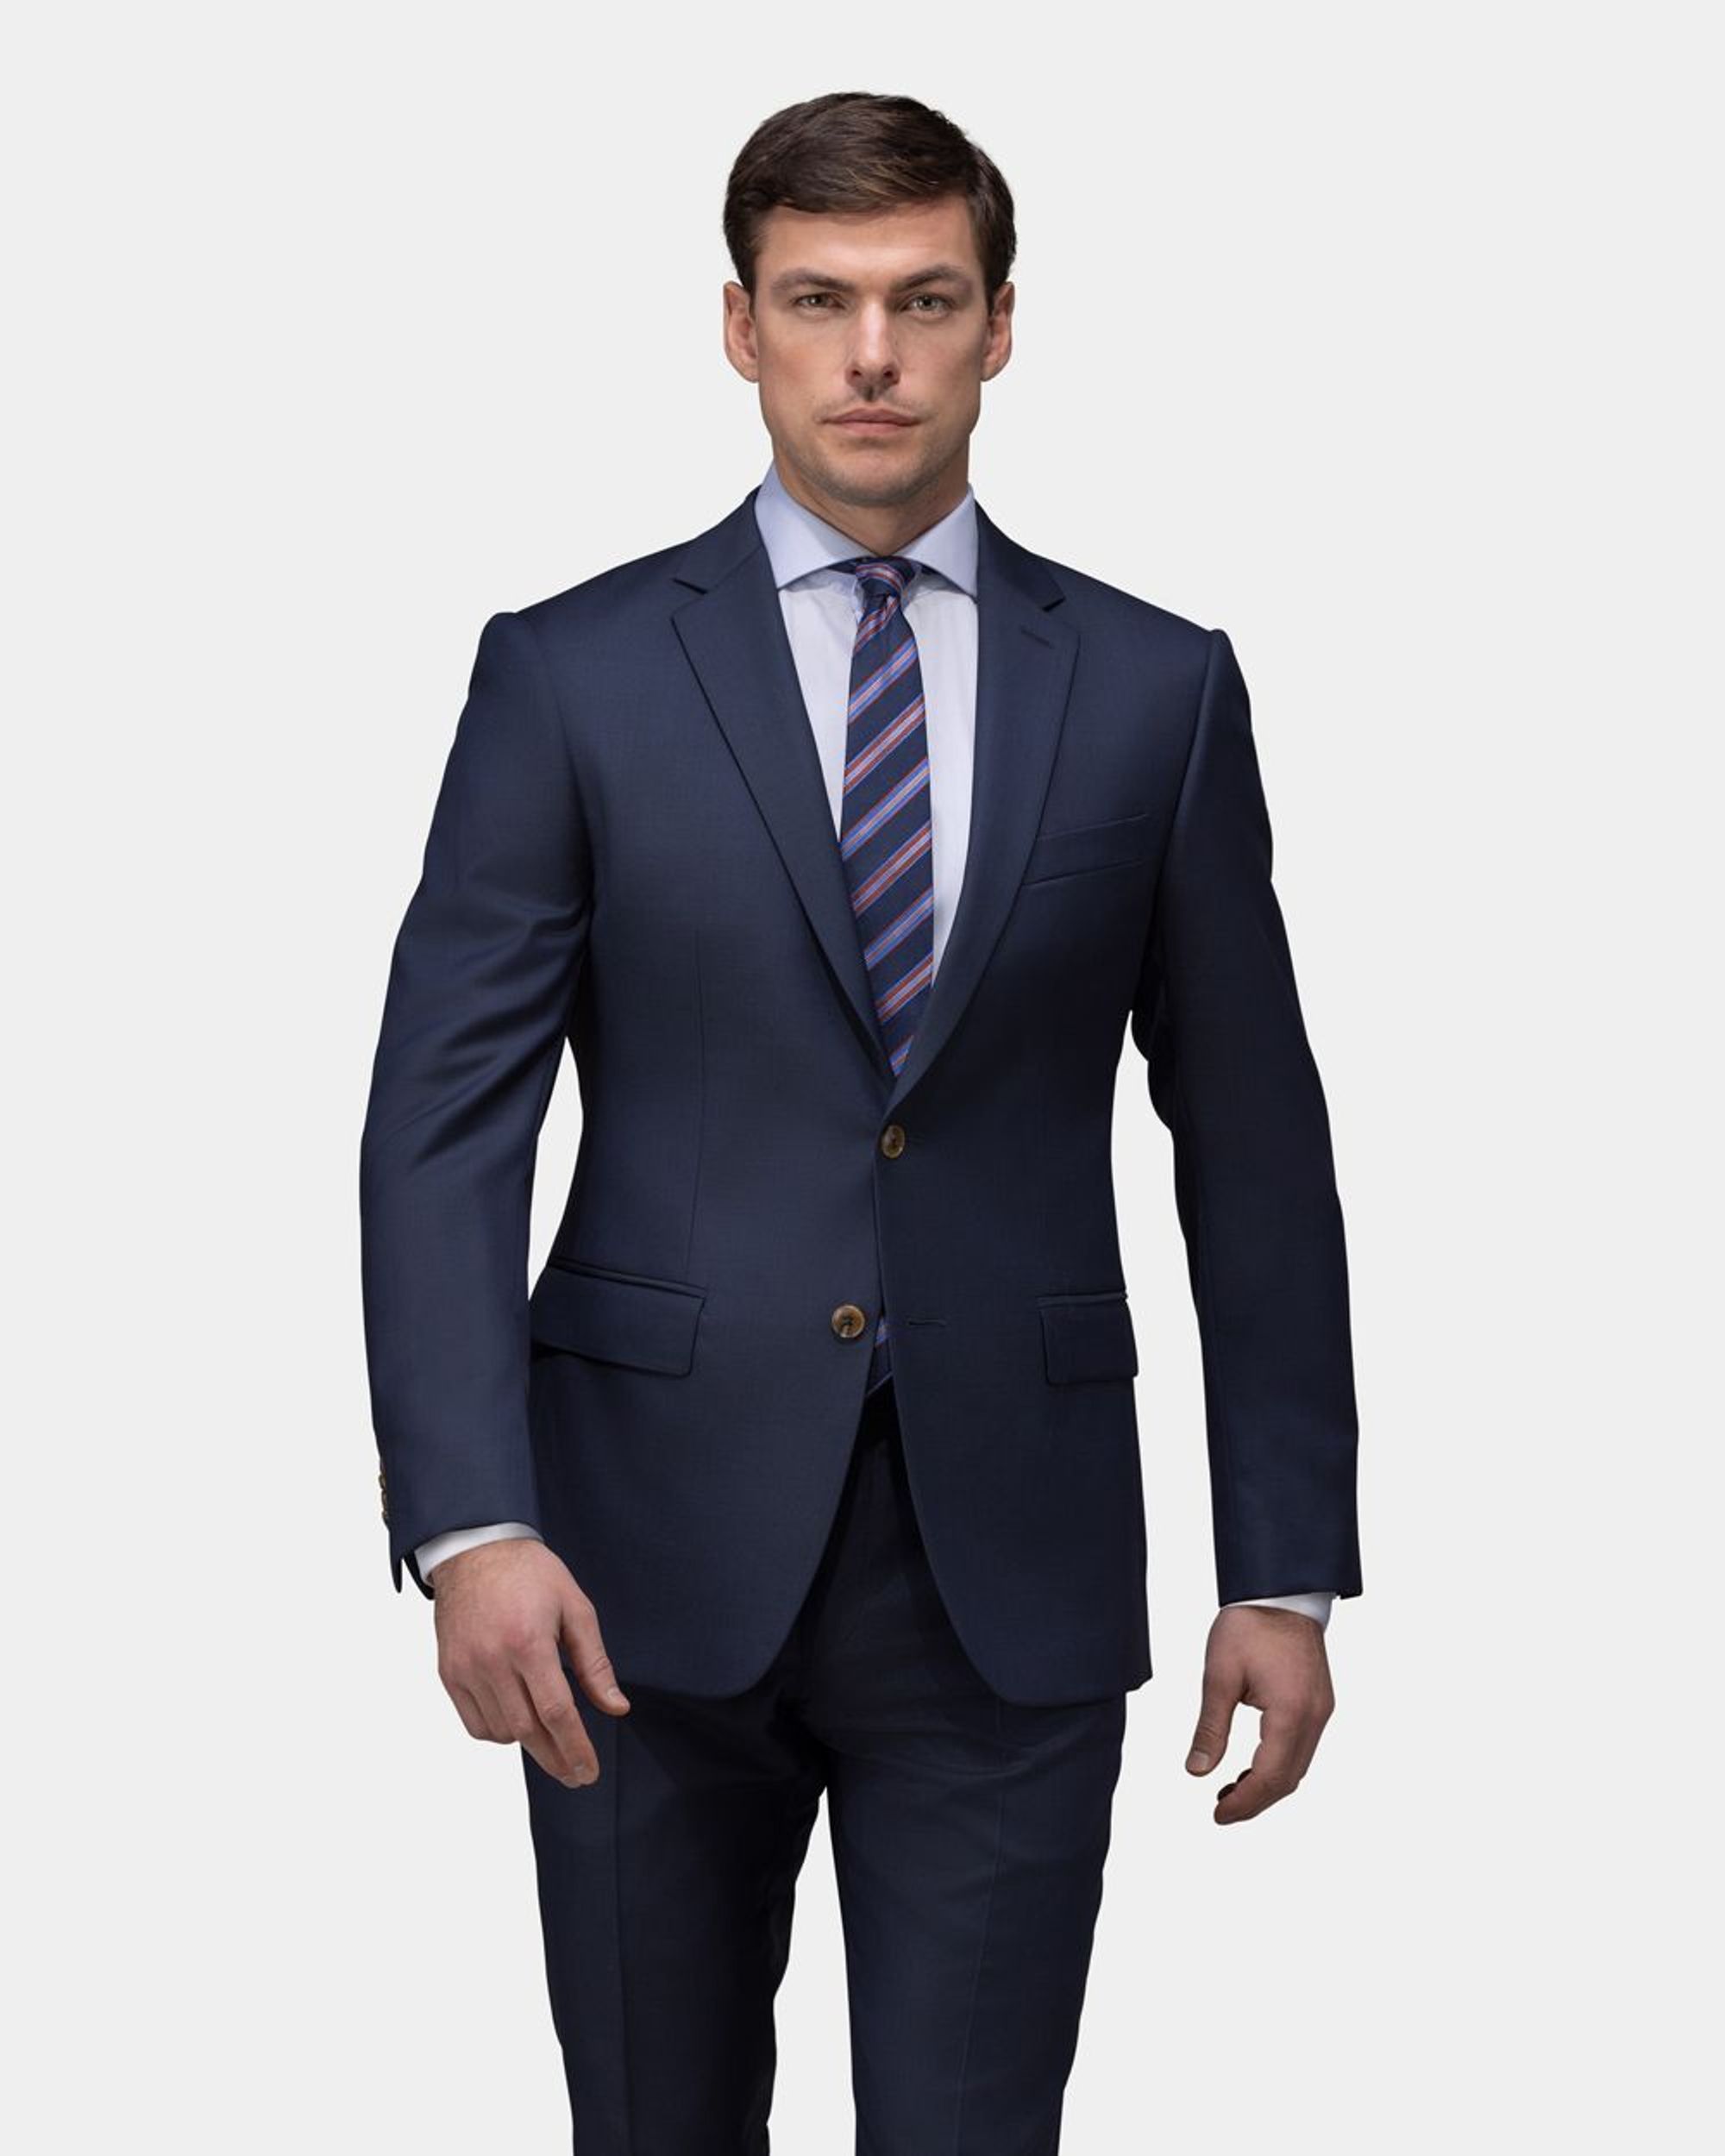 Mens Custom-made Suits - Starting at £299 | Tailor Store®